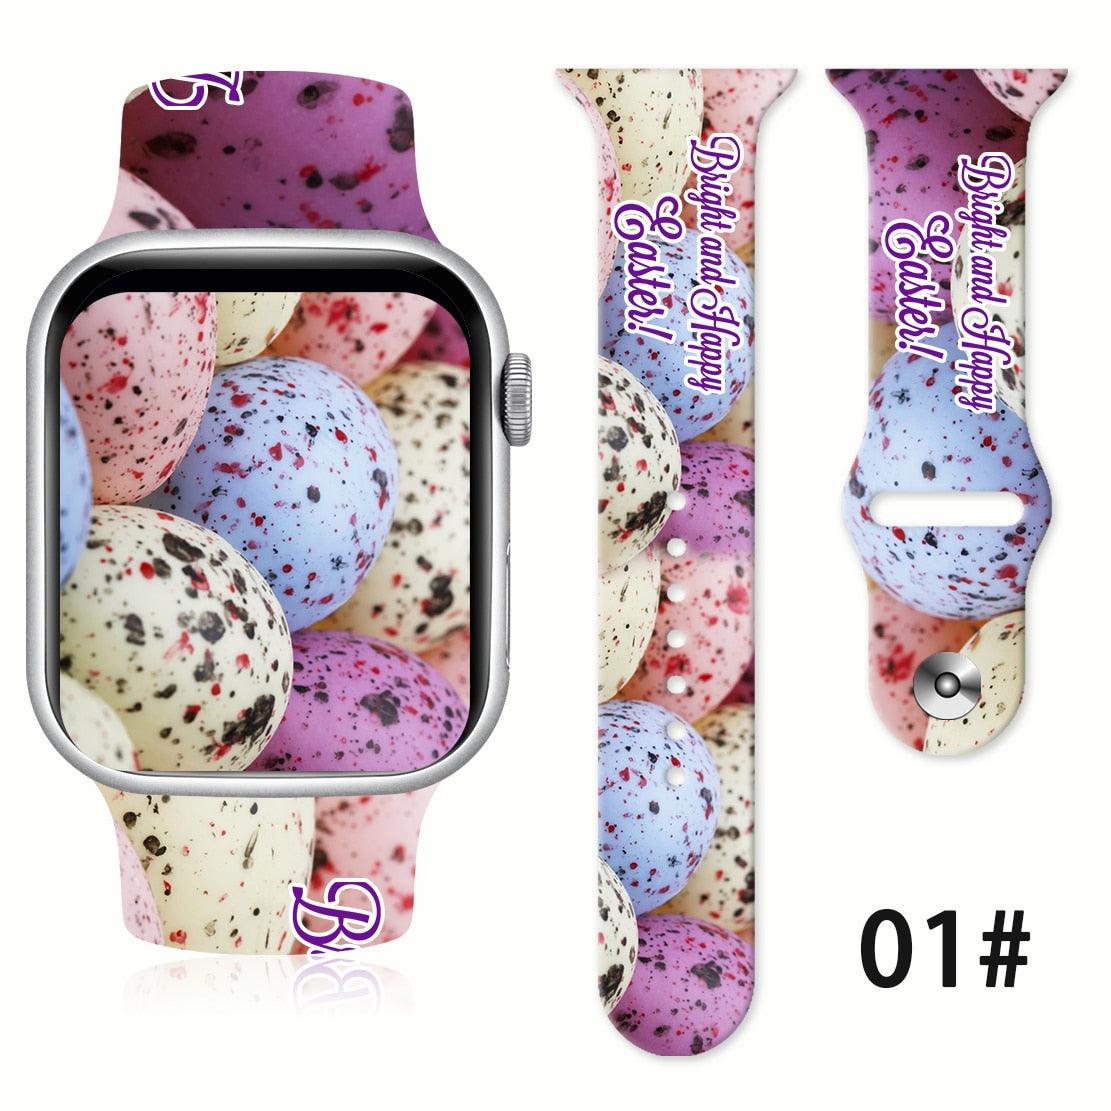 Easter Print Band for Apple Watch - watchband.direct